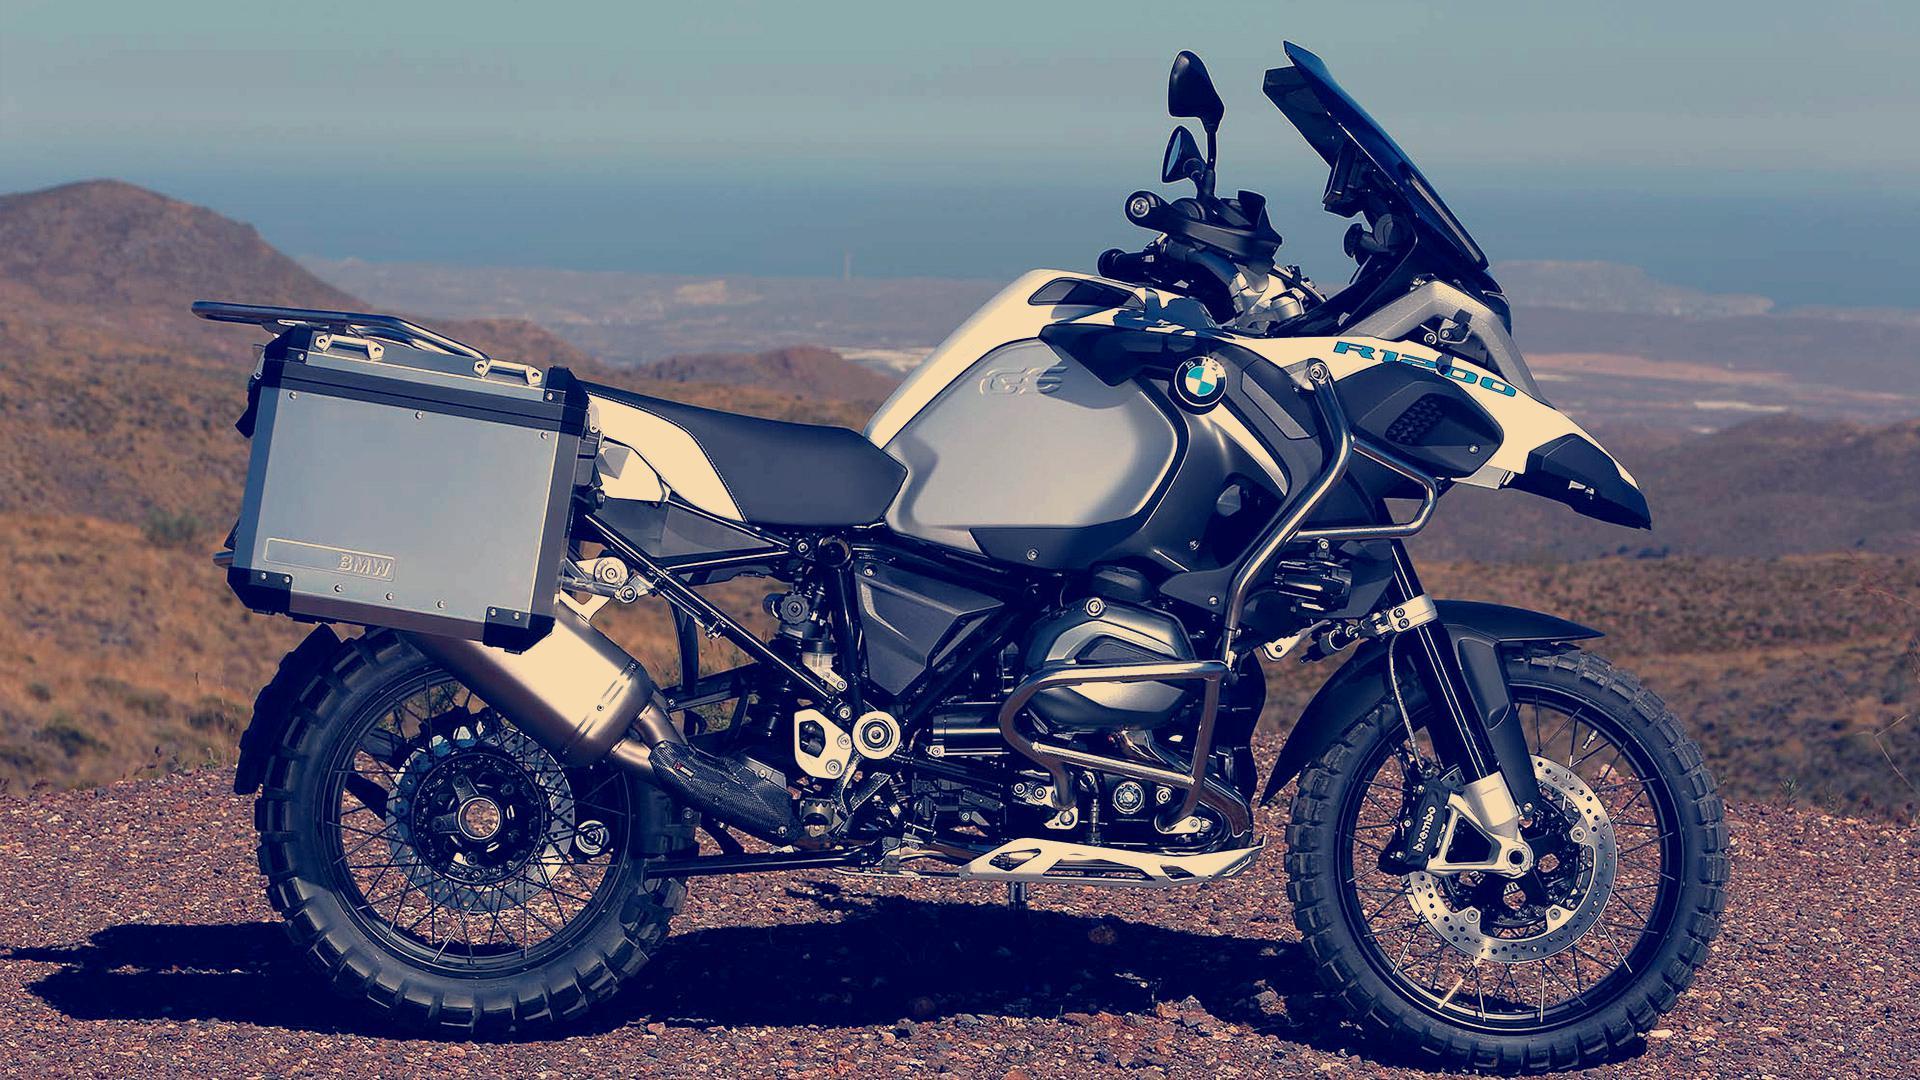 BMW R1200GS Adventure Review and Wallpaper